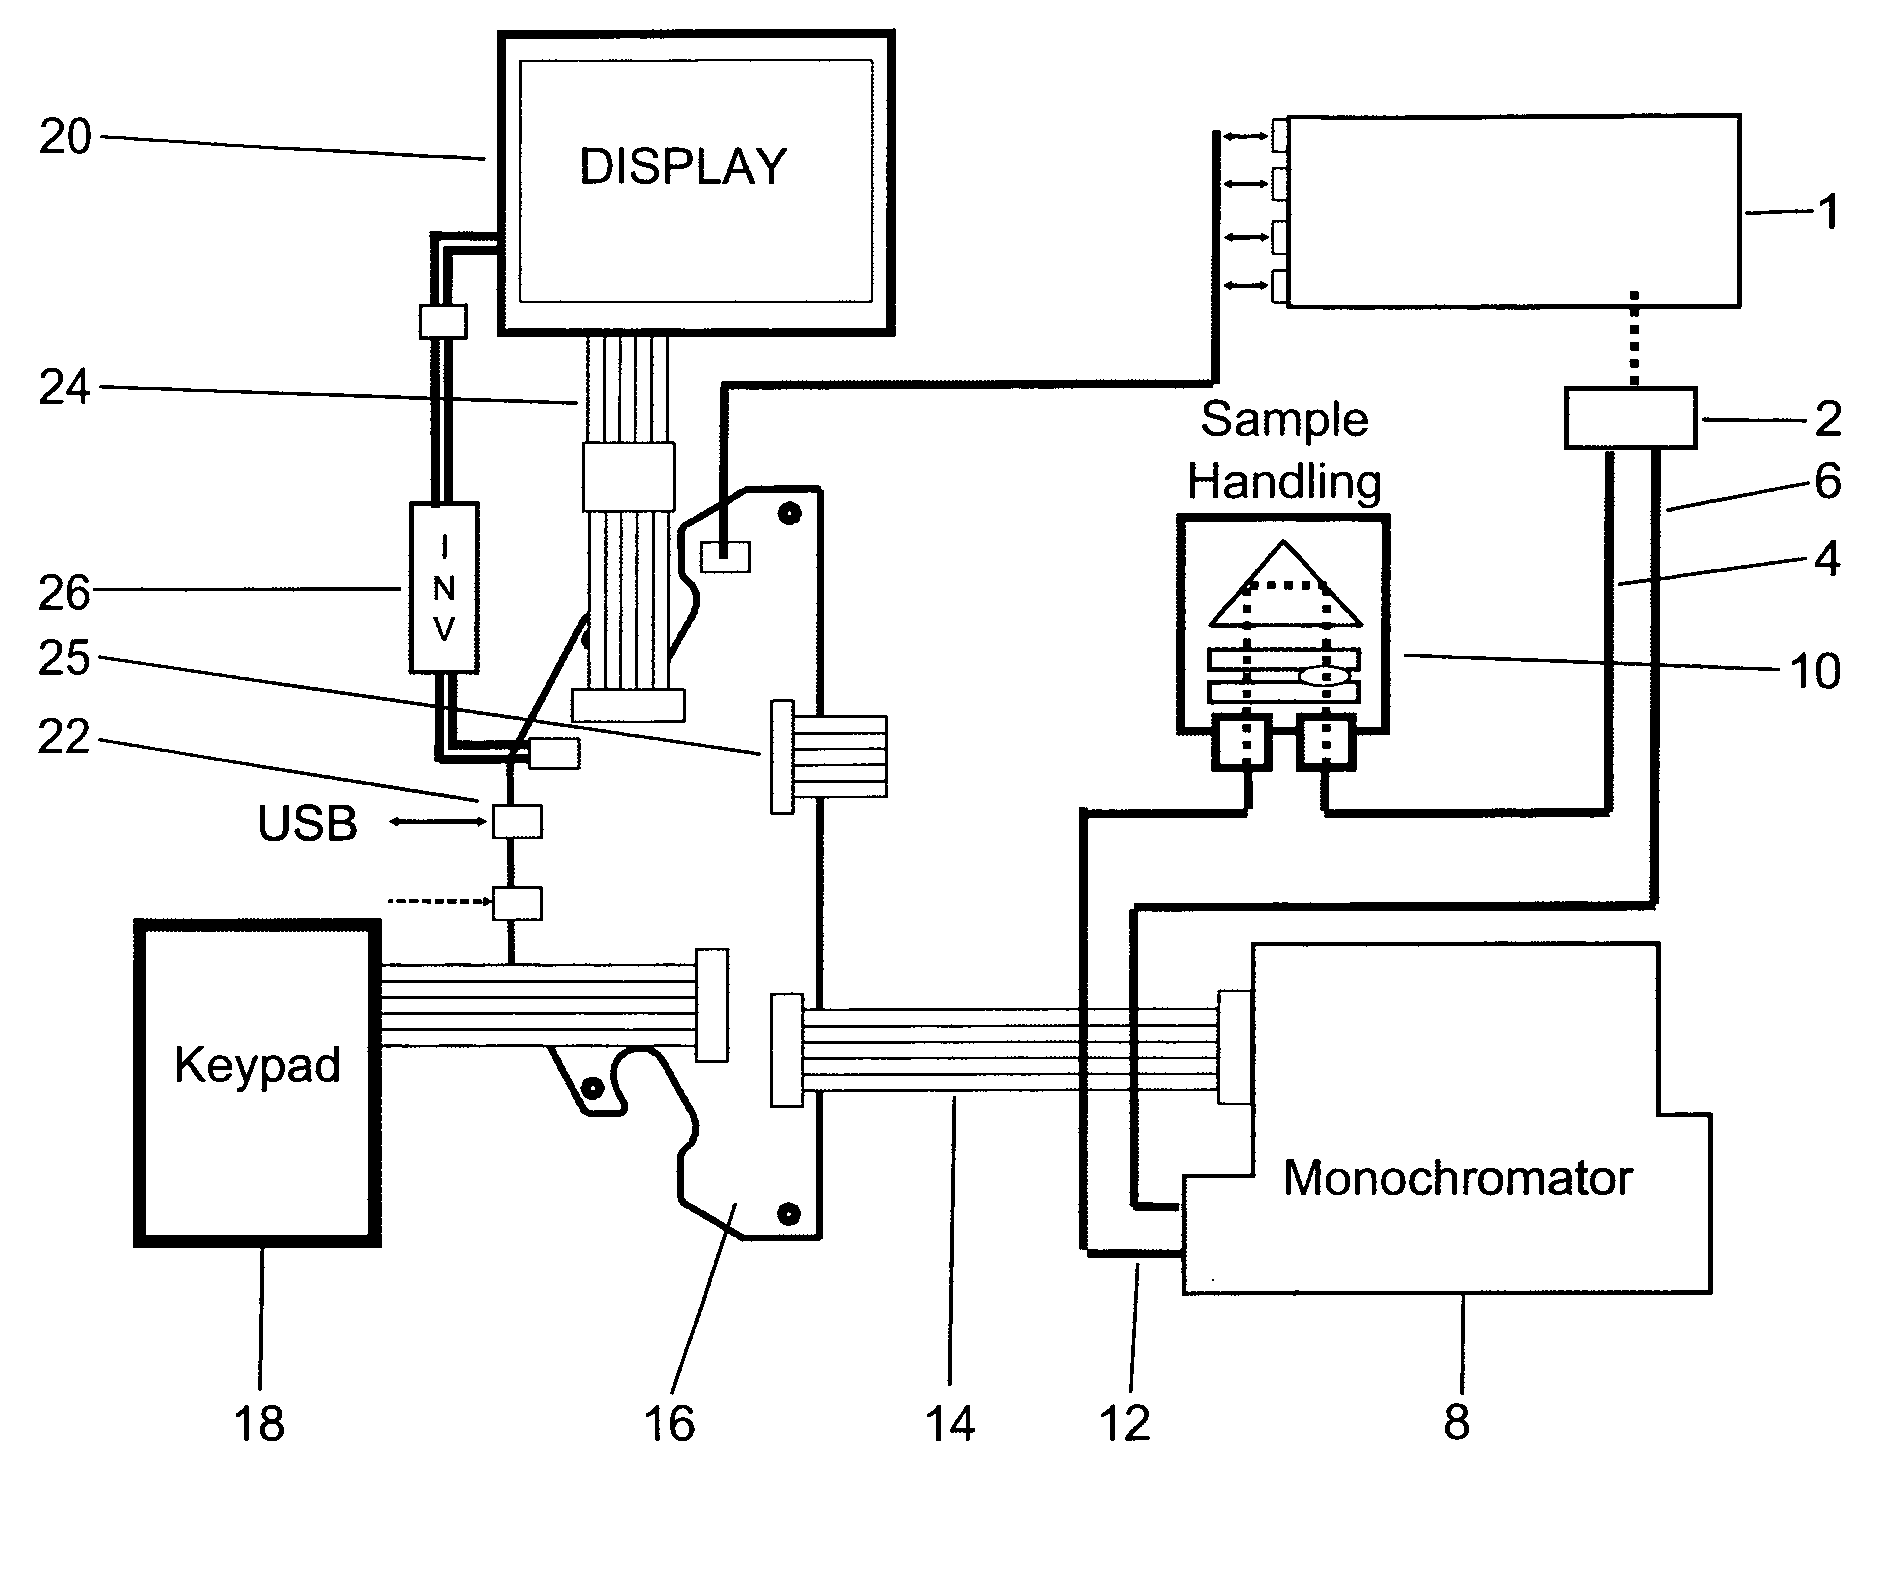 Analytical apparatus